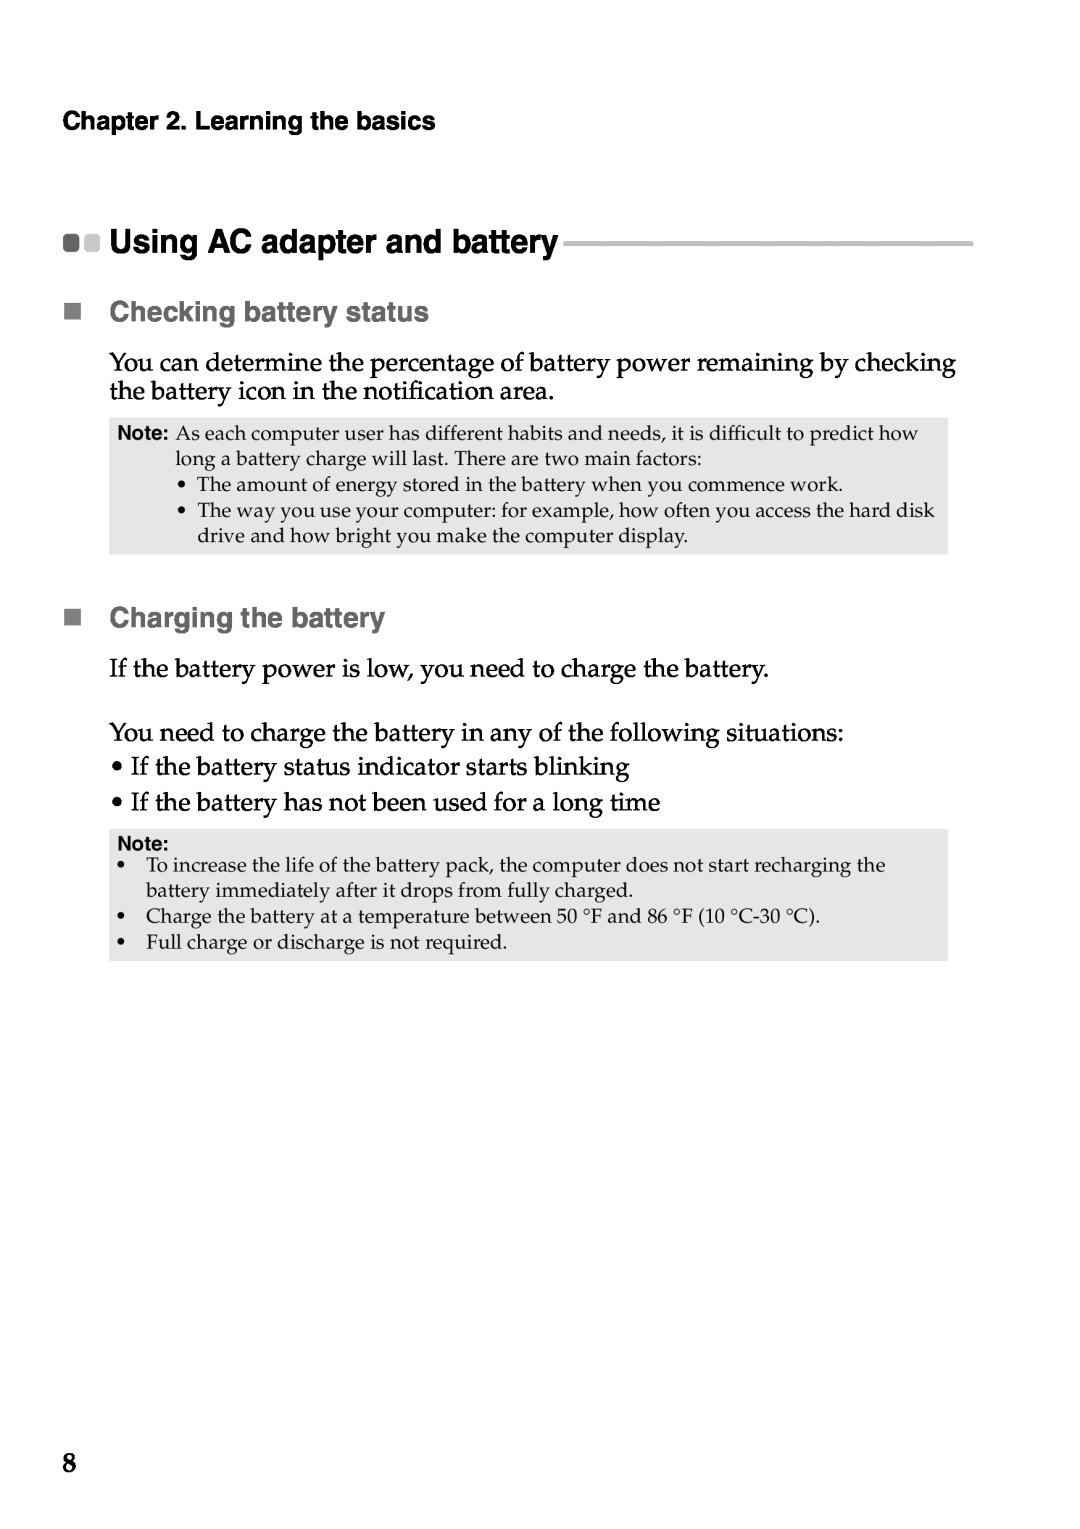 Lenovo S206, S200 „ Checking battery status, „ Charging the battery, Using AC adapter and battery, Learning the basics 